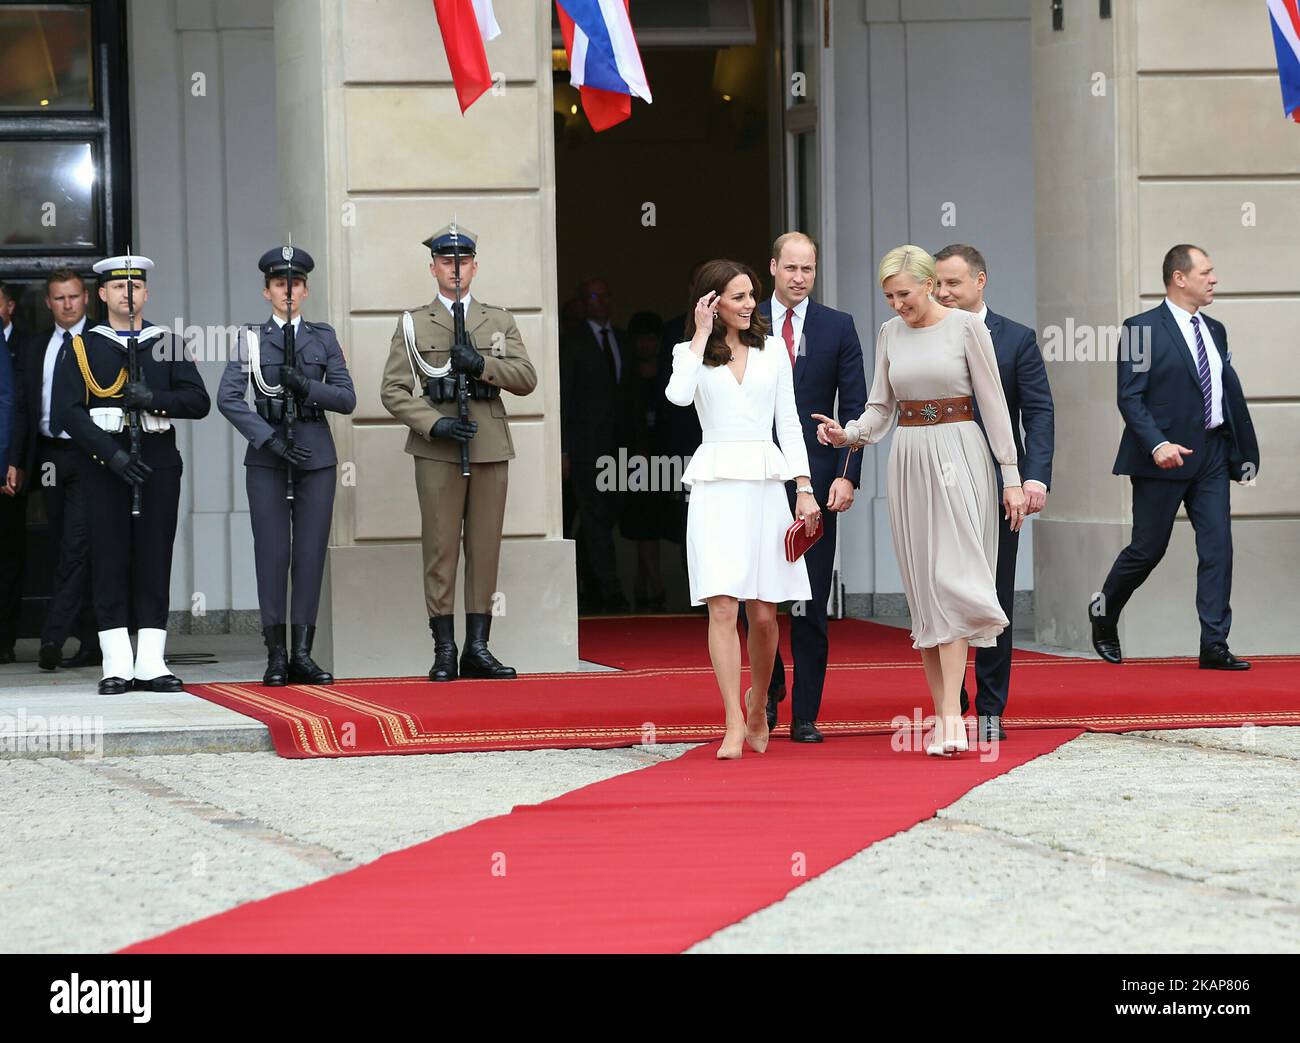 Bidding farewell to their Royal Highnesses The Duke of Cambridge (William Arthur Philip Louis), and Duchess of Cambridge (Catherine Elizabeth Middleton) in front of the Presidential Palace by the President of the Republic of Poland Andrzej Duda and First Lady Agata Kornhauser-Duda. July 17, 2017, Warsaw, Poland (Photo by Krystian Dobuszynski/NurPhoto) *** Please Use Credit from Credit Field *** Stock Photo